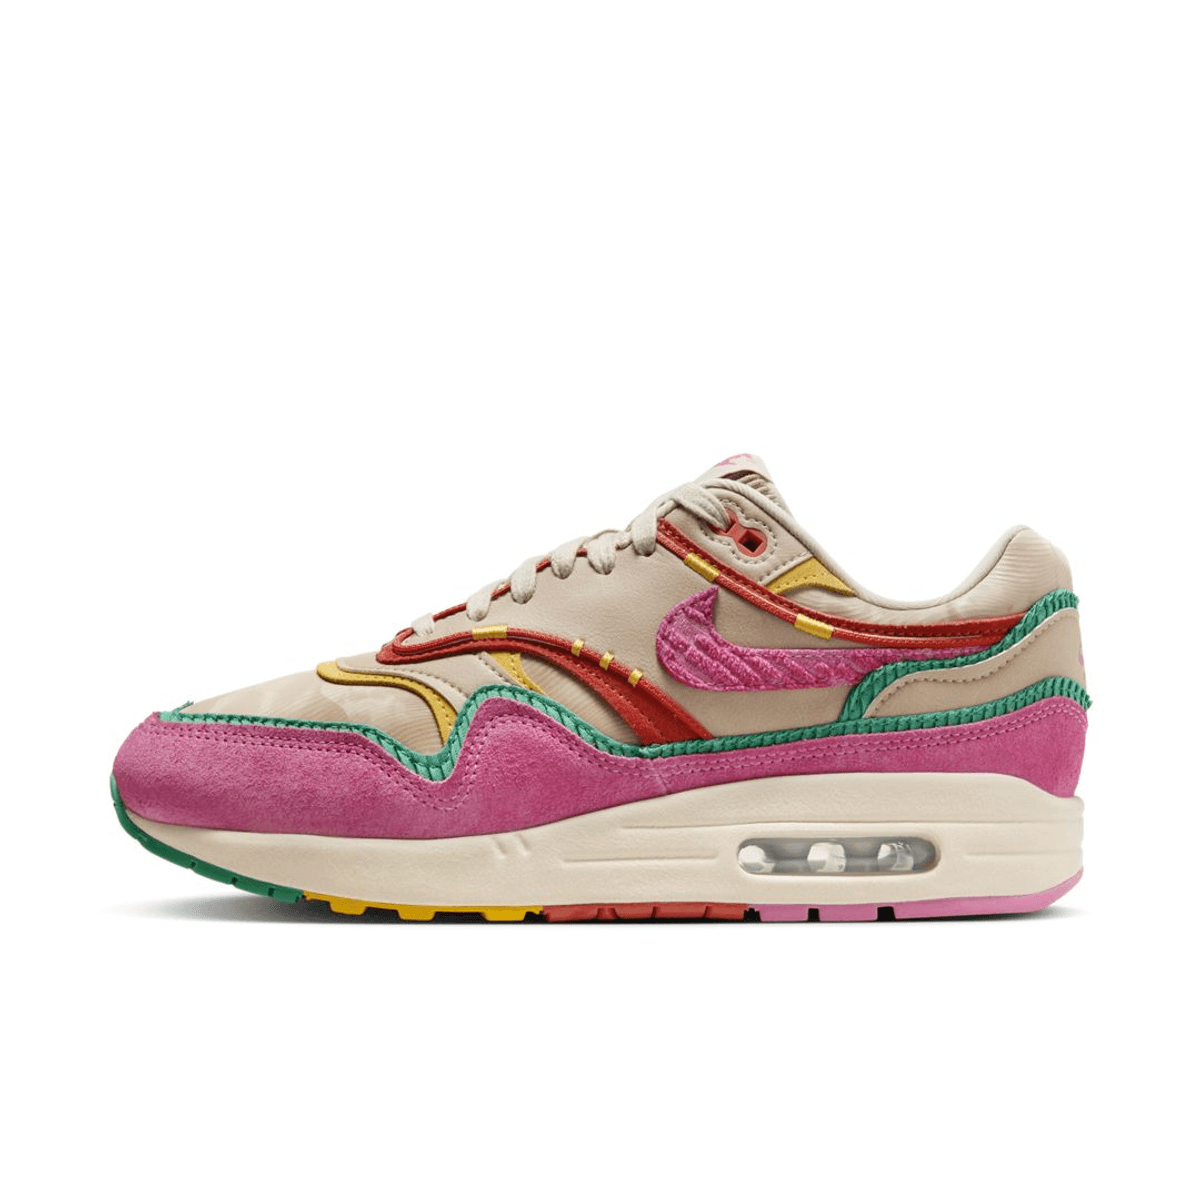 Celebrate Latino Heritage Month With The Nike Air Max 1 "Familia"